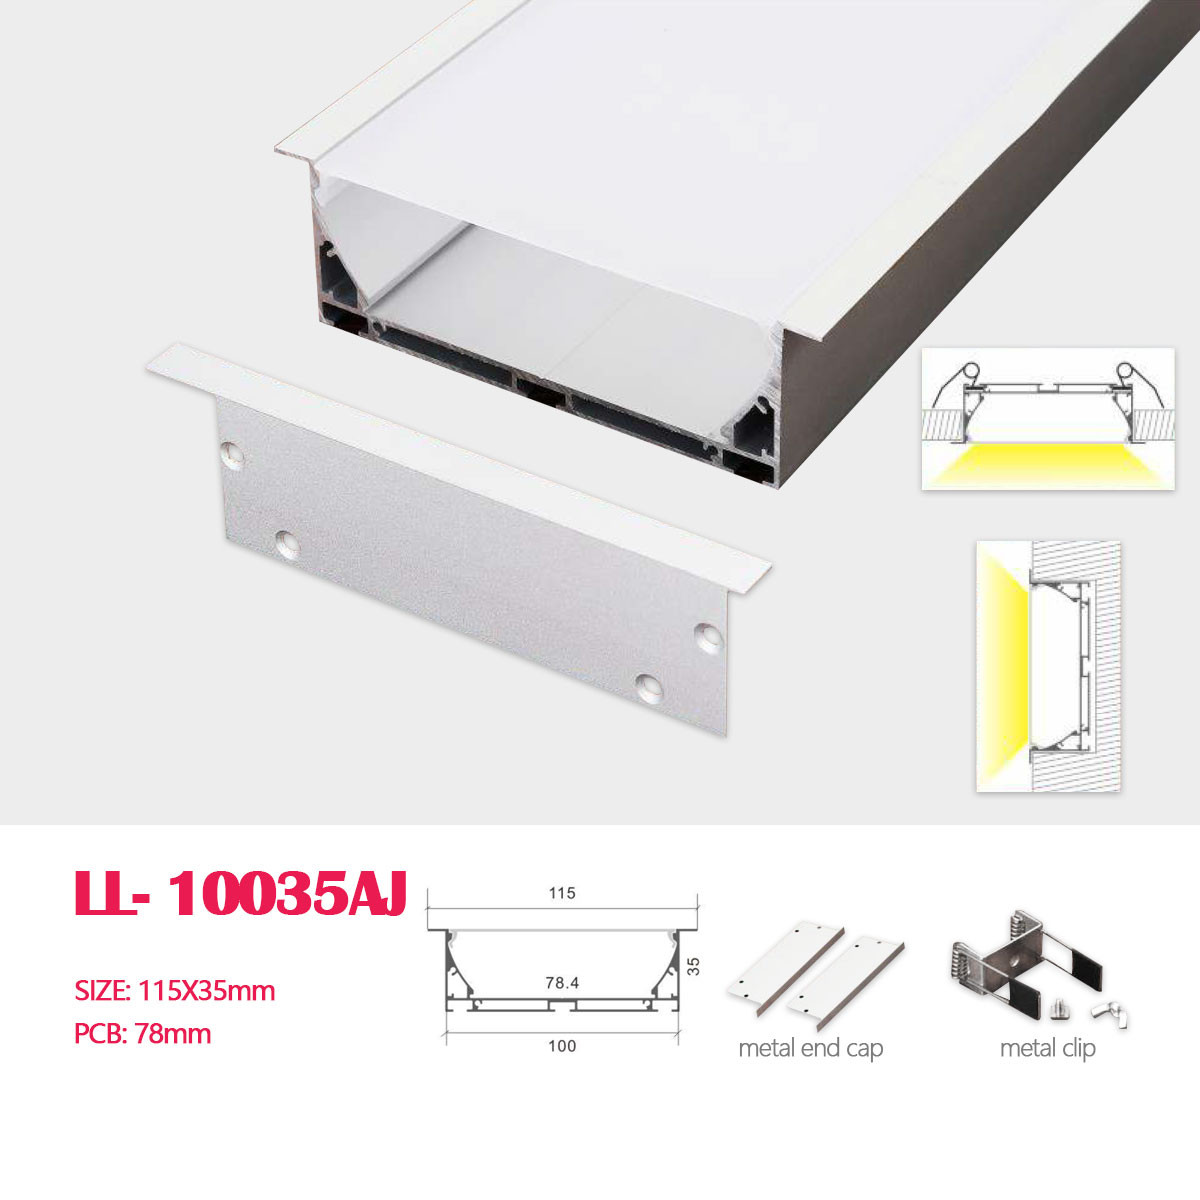 1M (3.28FT) 115MM*35MM Big Size Square Aluminum Profile with Flat cover and Clips, Pendant Hardware for Recessed Led  Lighting